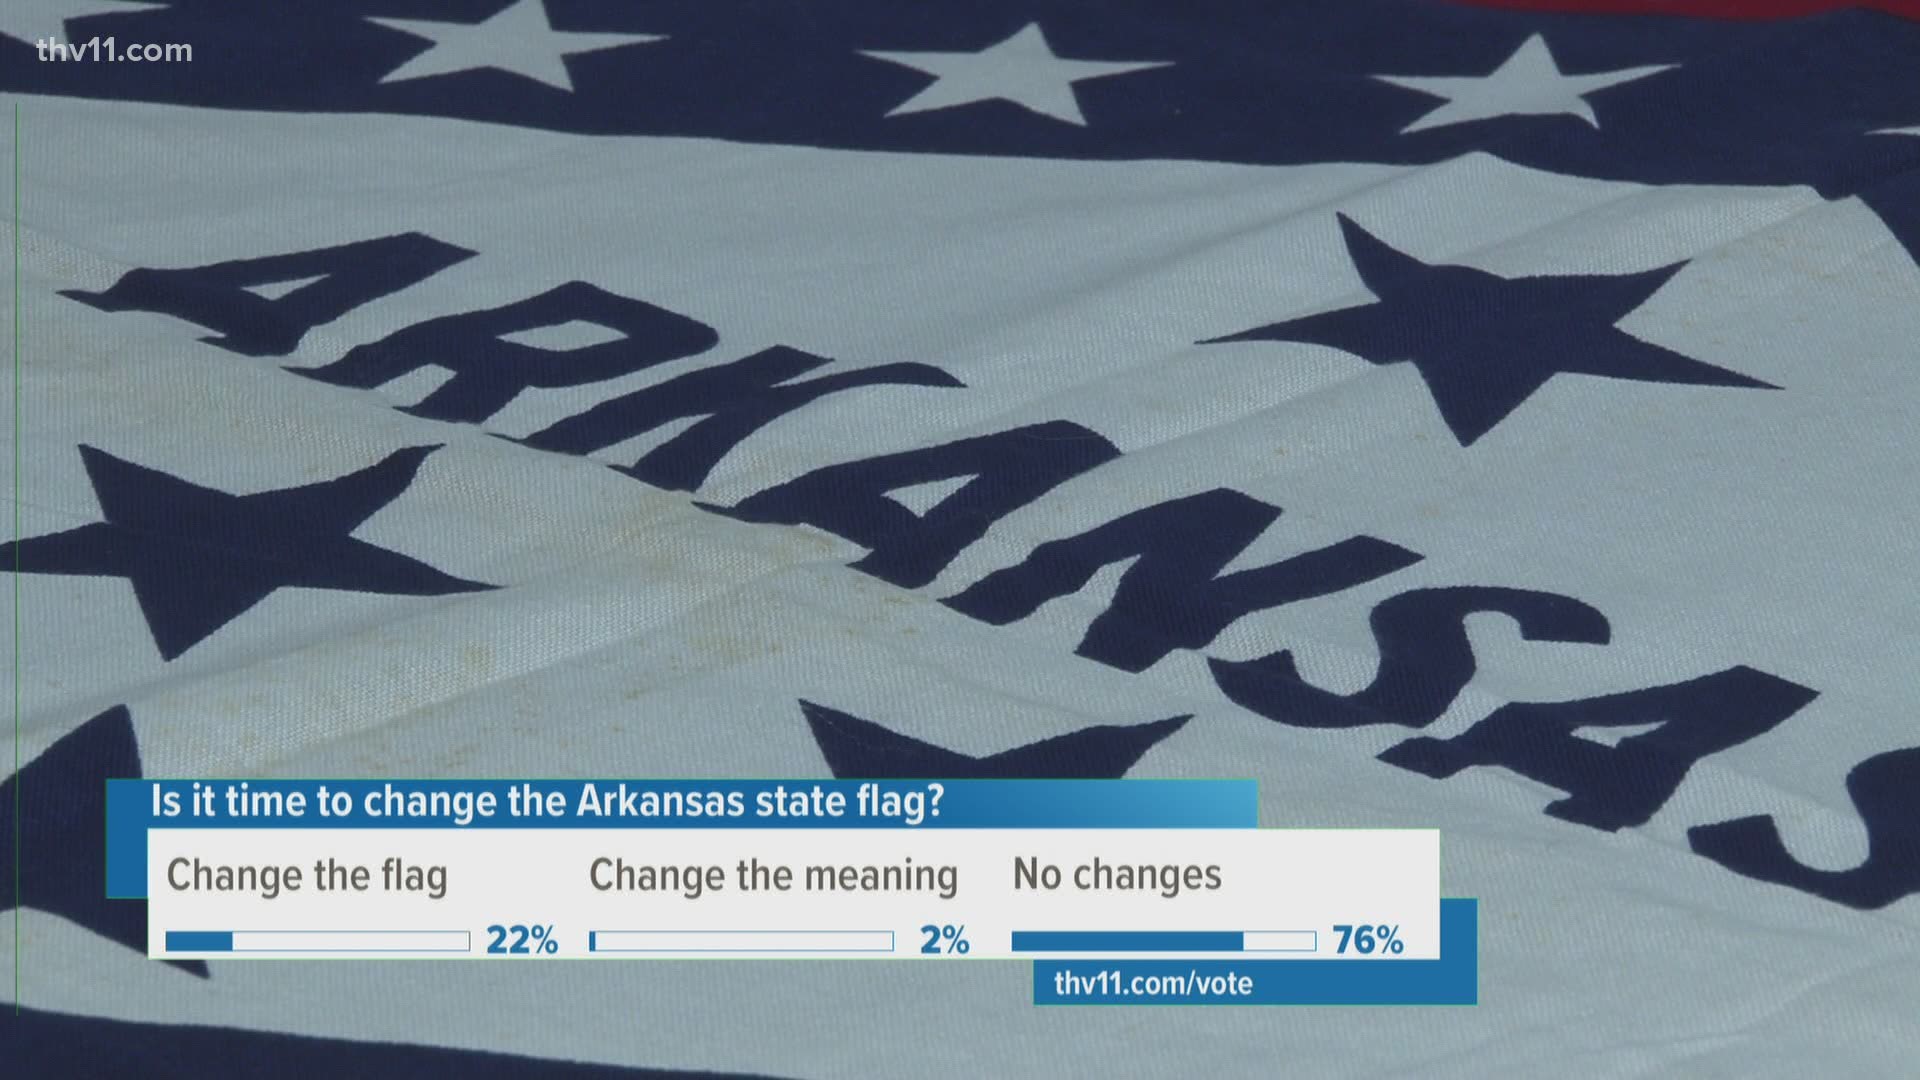 Confederate symbols, specifically for flags, are causing a lot of controversy across the country, and it has people wondering about the history of Arkansas' flag.